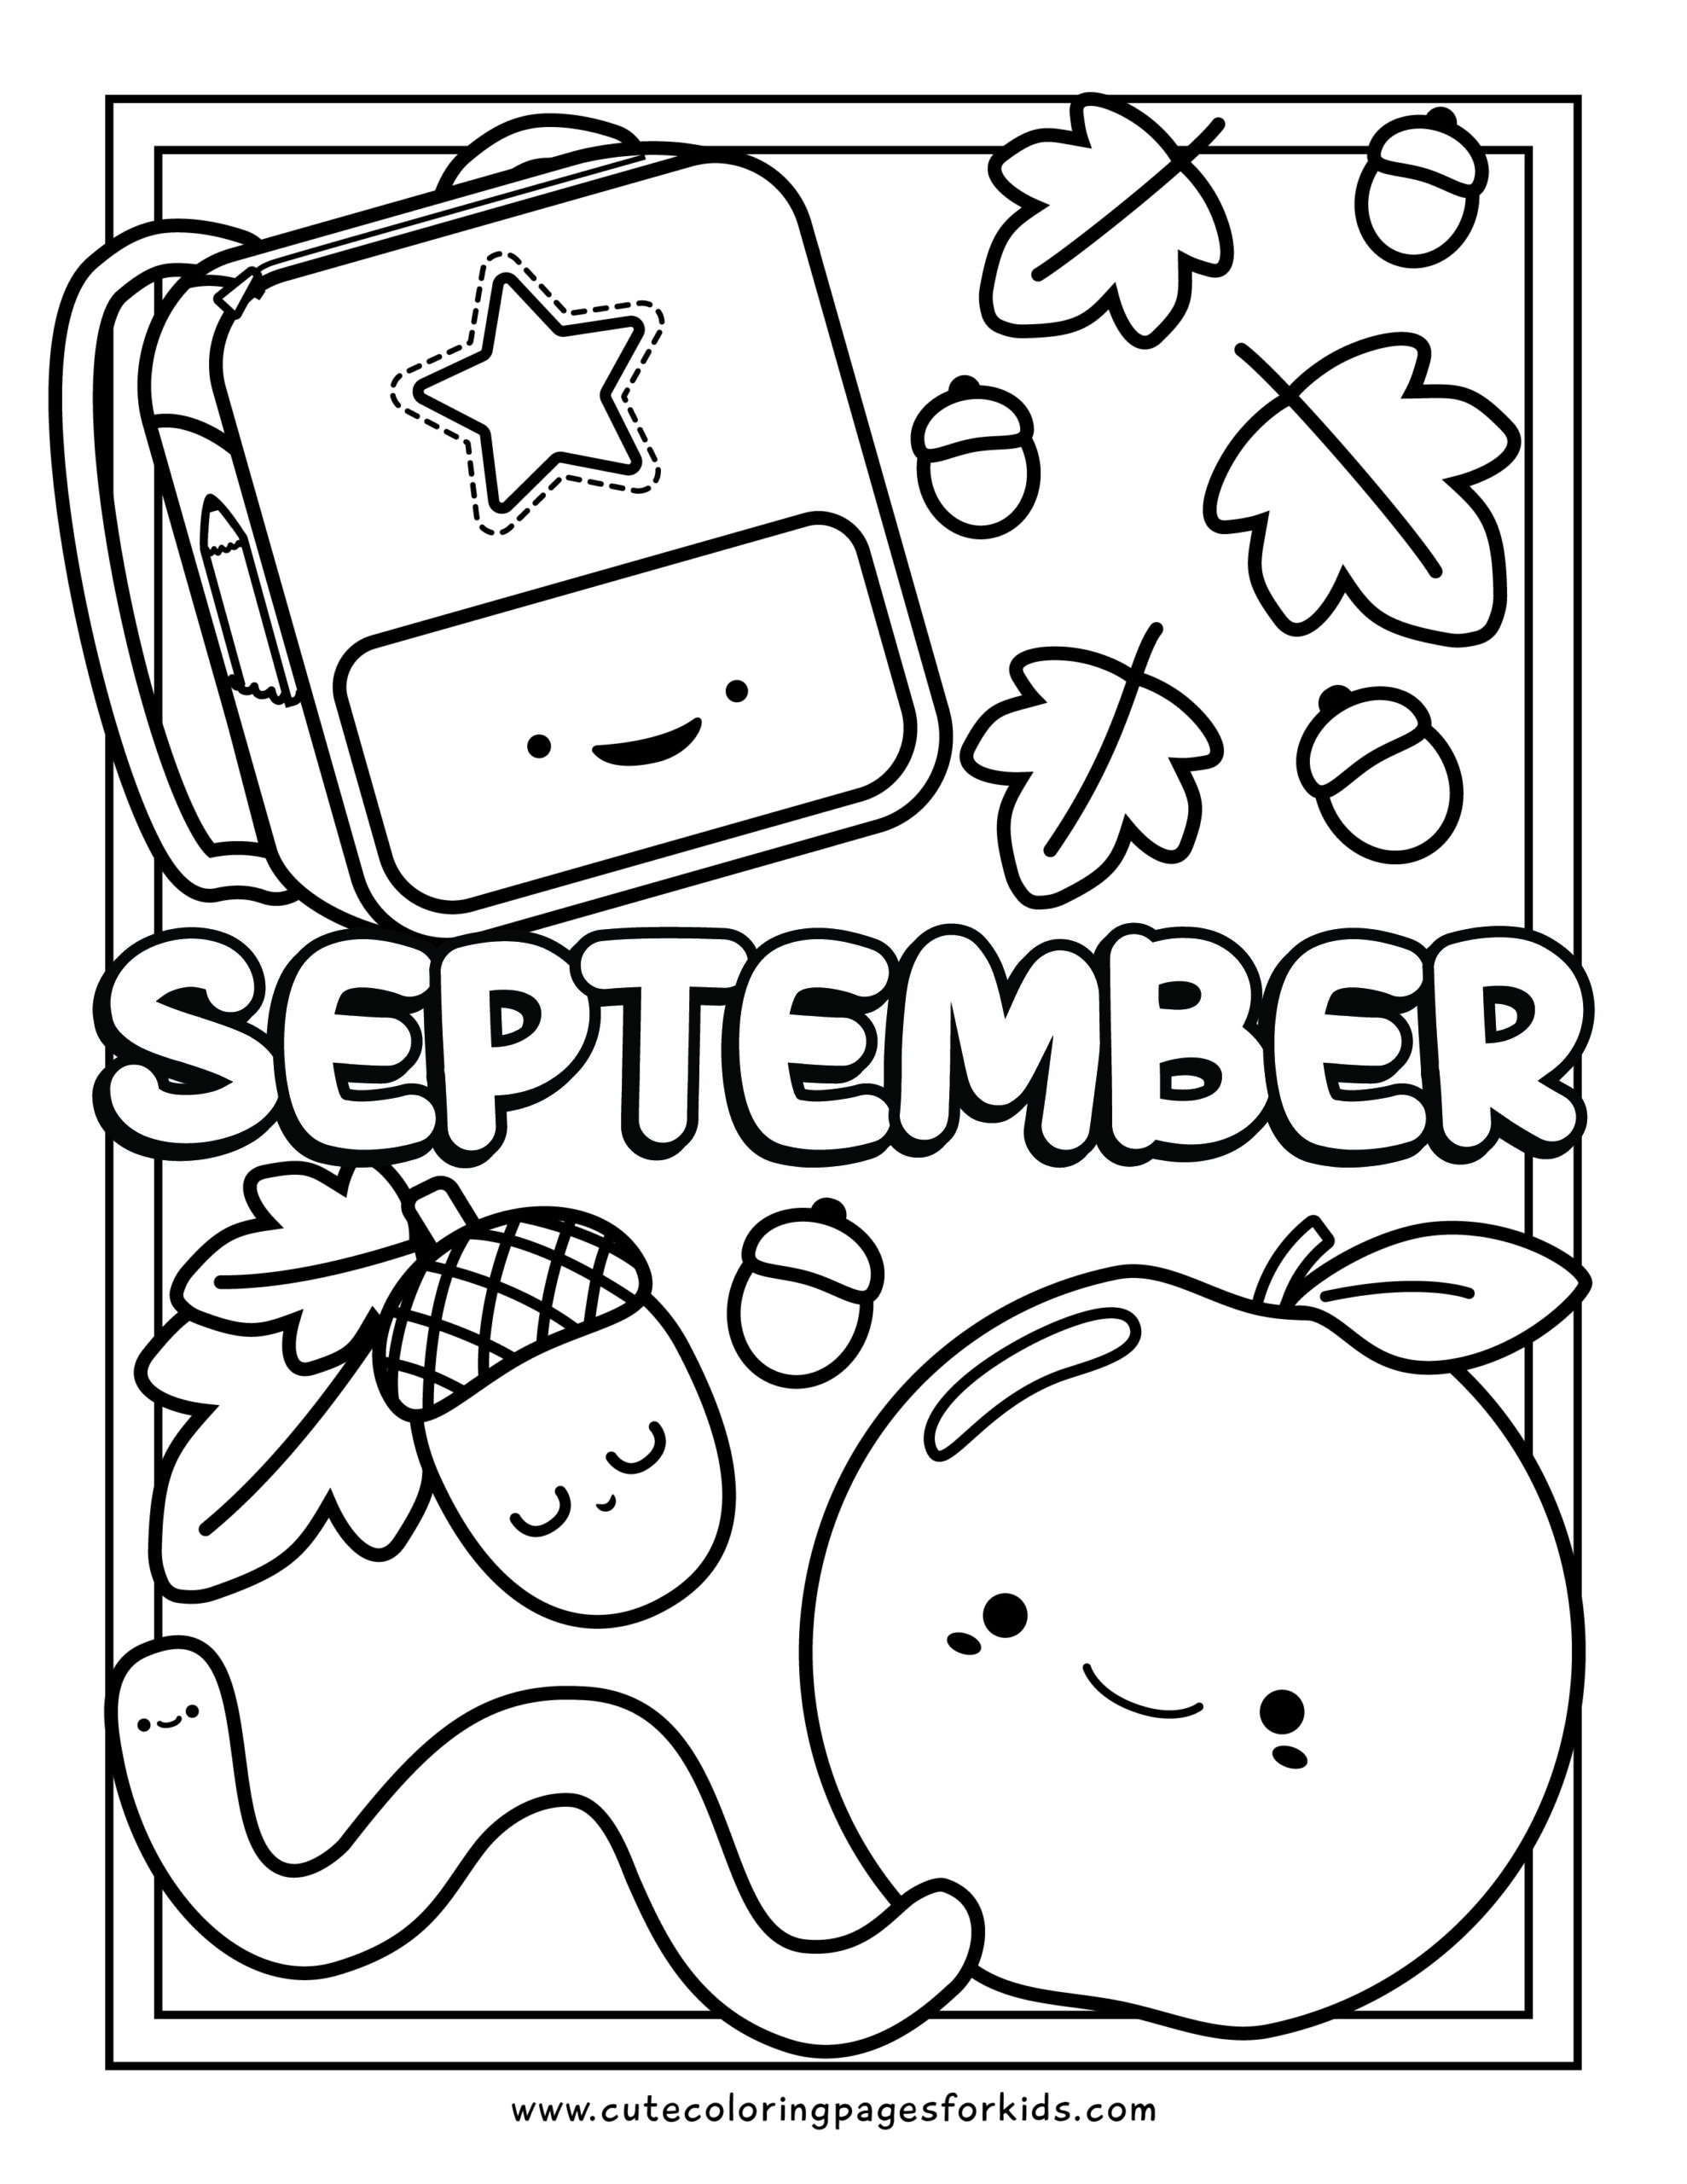 September Coloring Pages Cute Coloring Pages For Kids